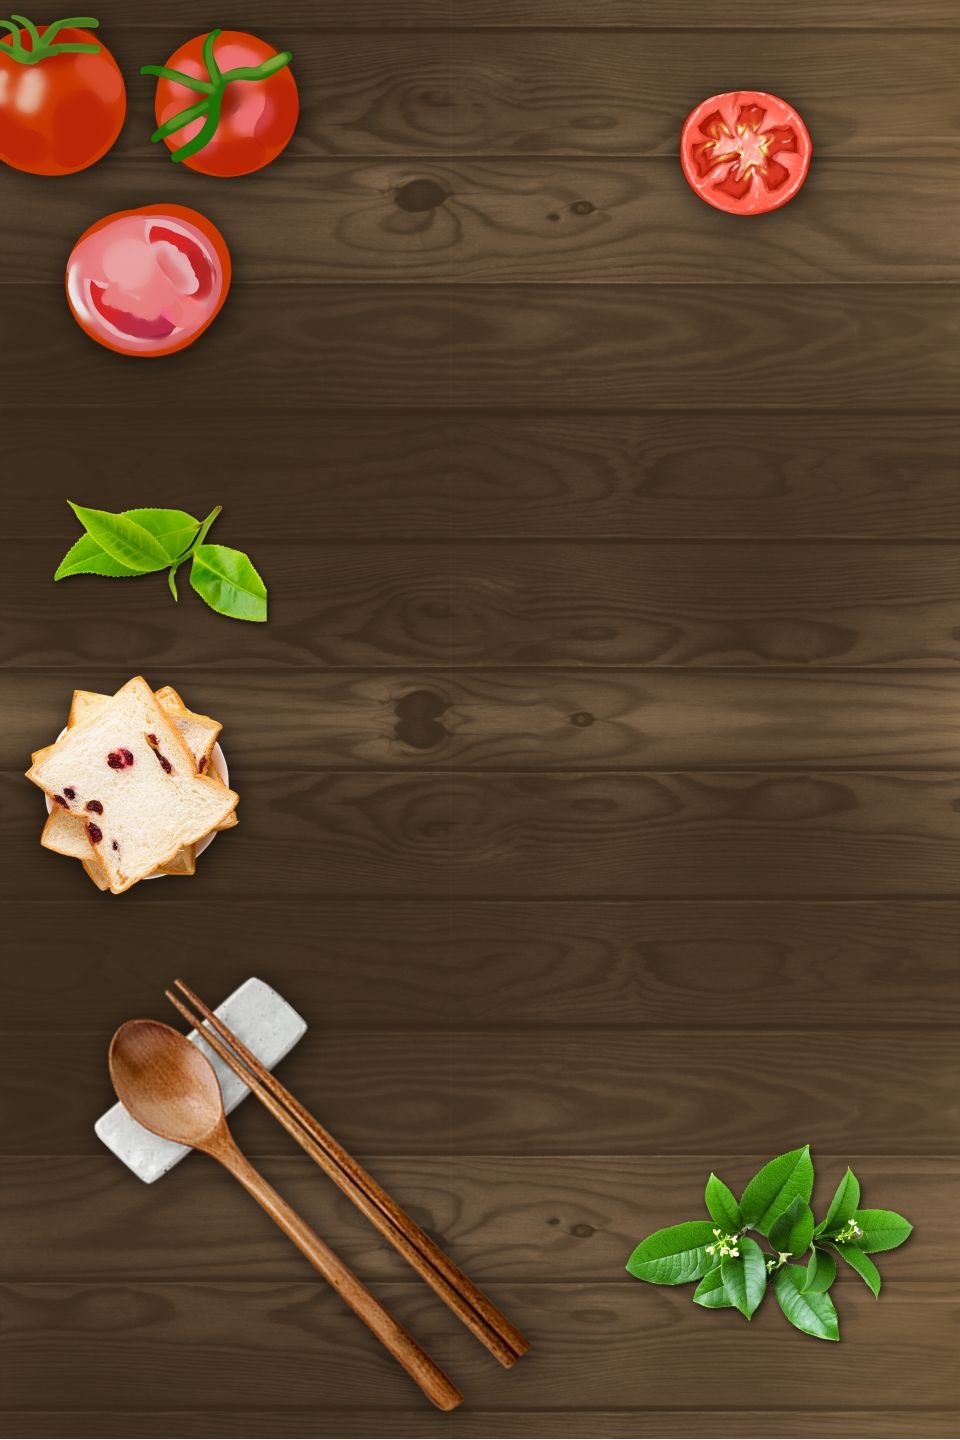 Catering Backgrounds